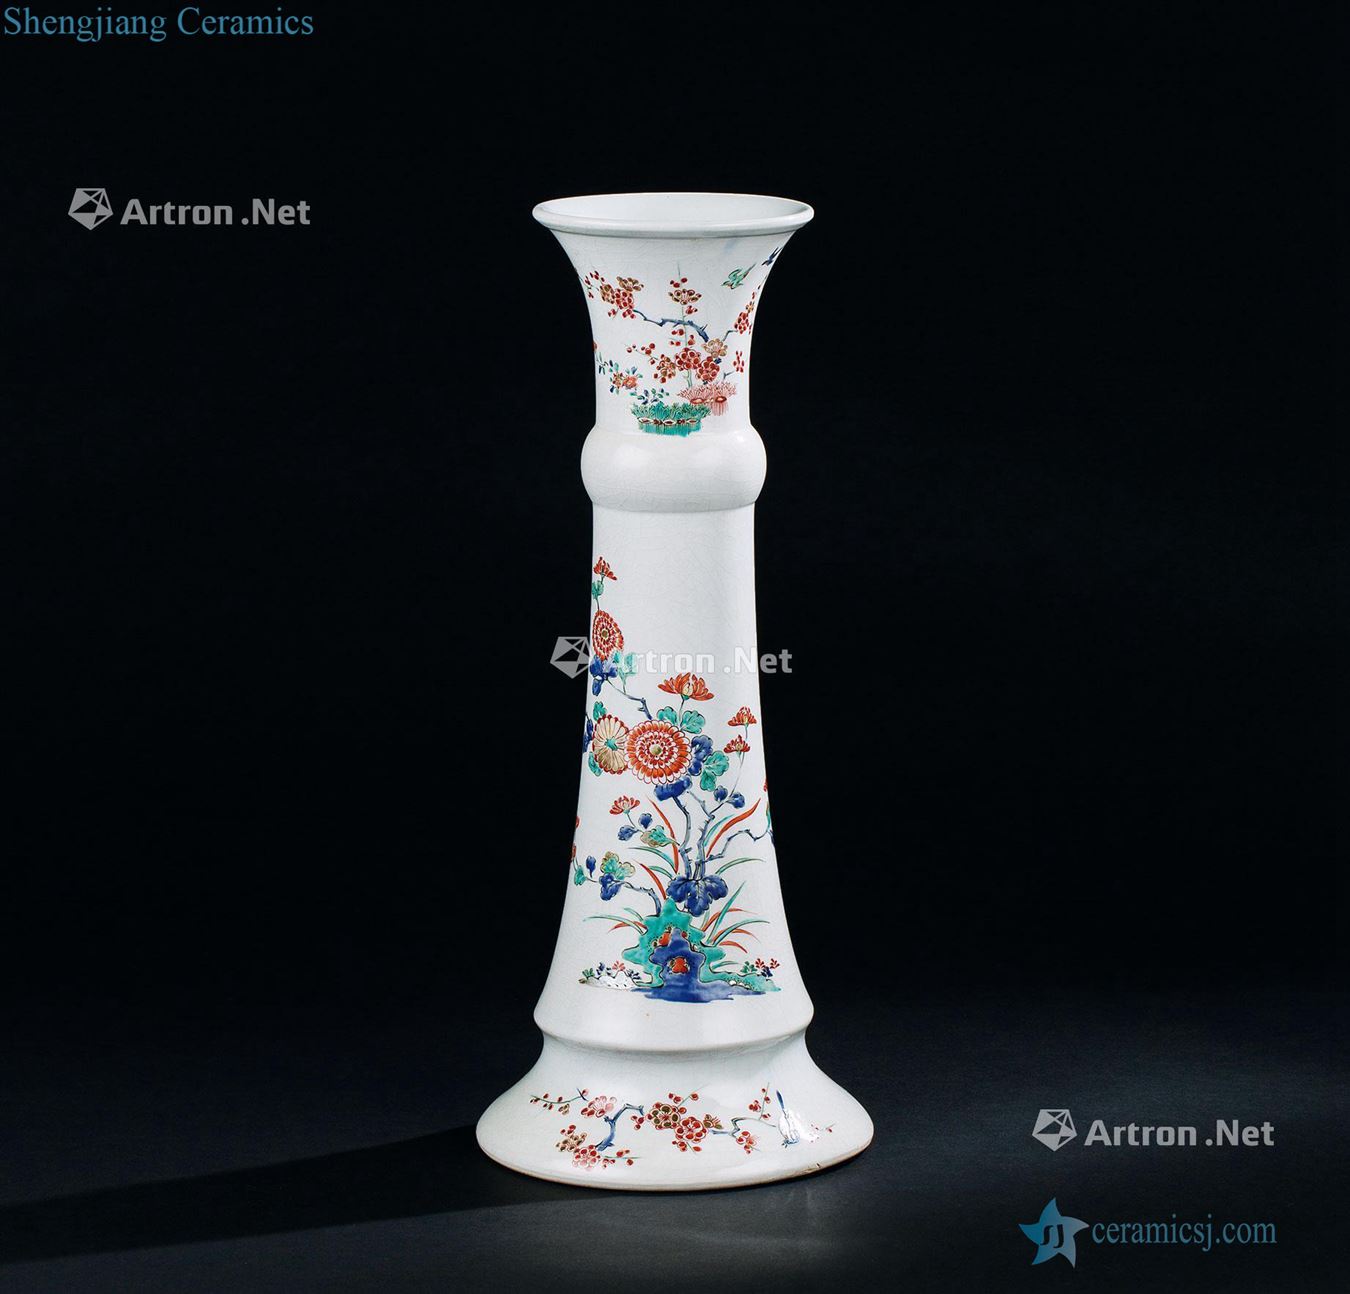 In the qing dynasty (1644-1911), the colorful flowers grain export porcelain lamp holder